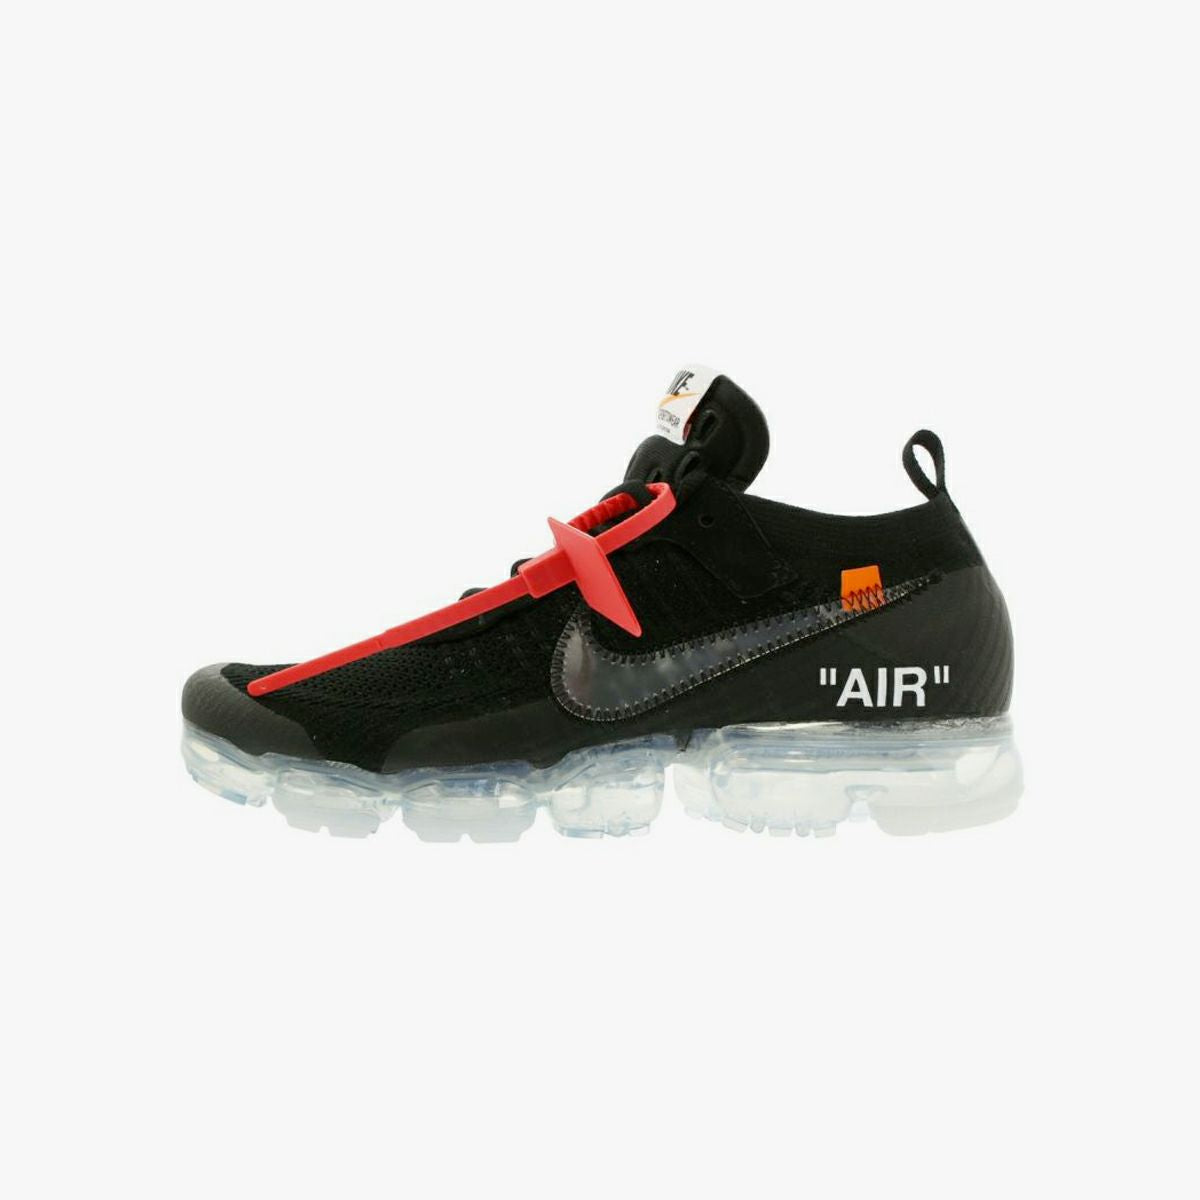 NIKE AIR VAPORMAX FLYKNIT BLACK/TOTAL CRIMSON/CLEAR 【OFF-WHITE】